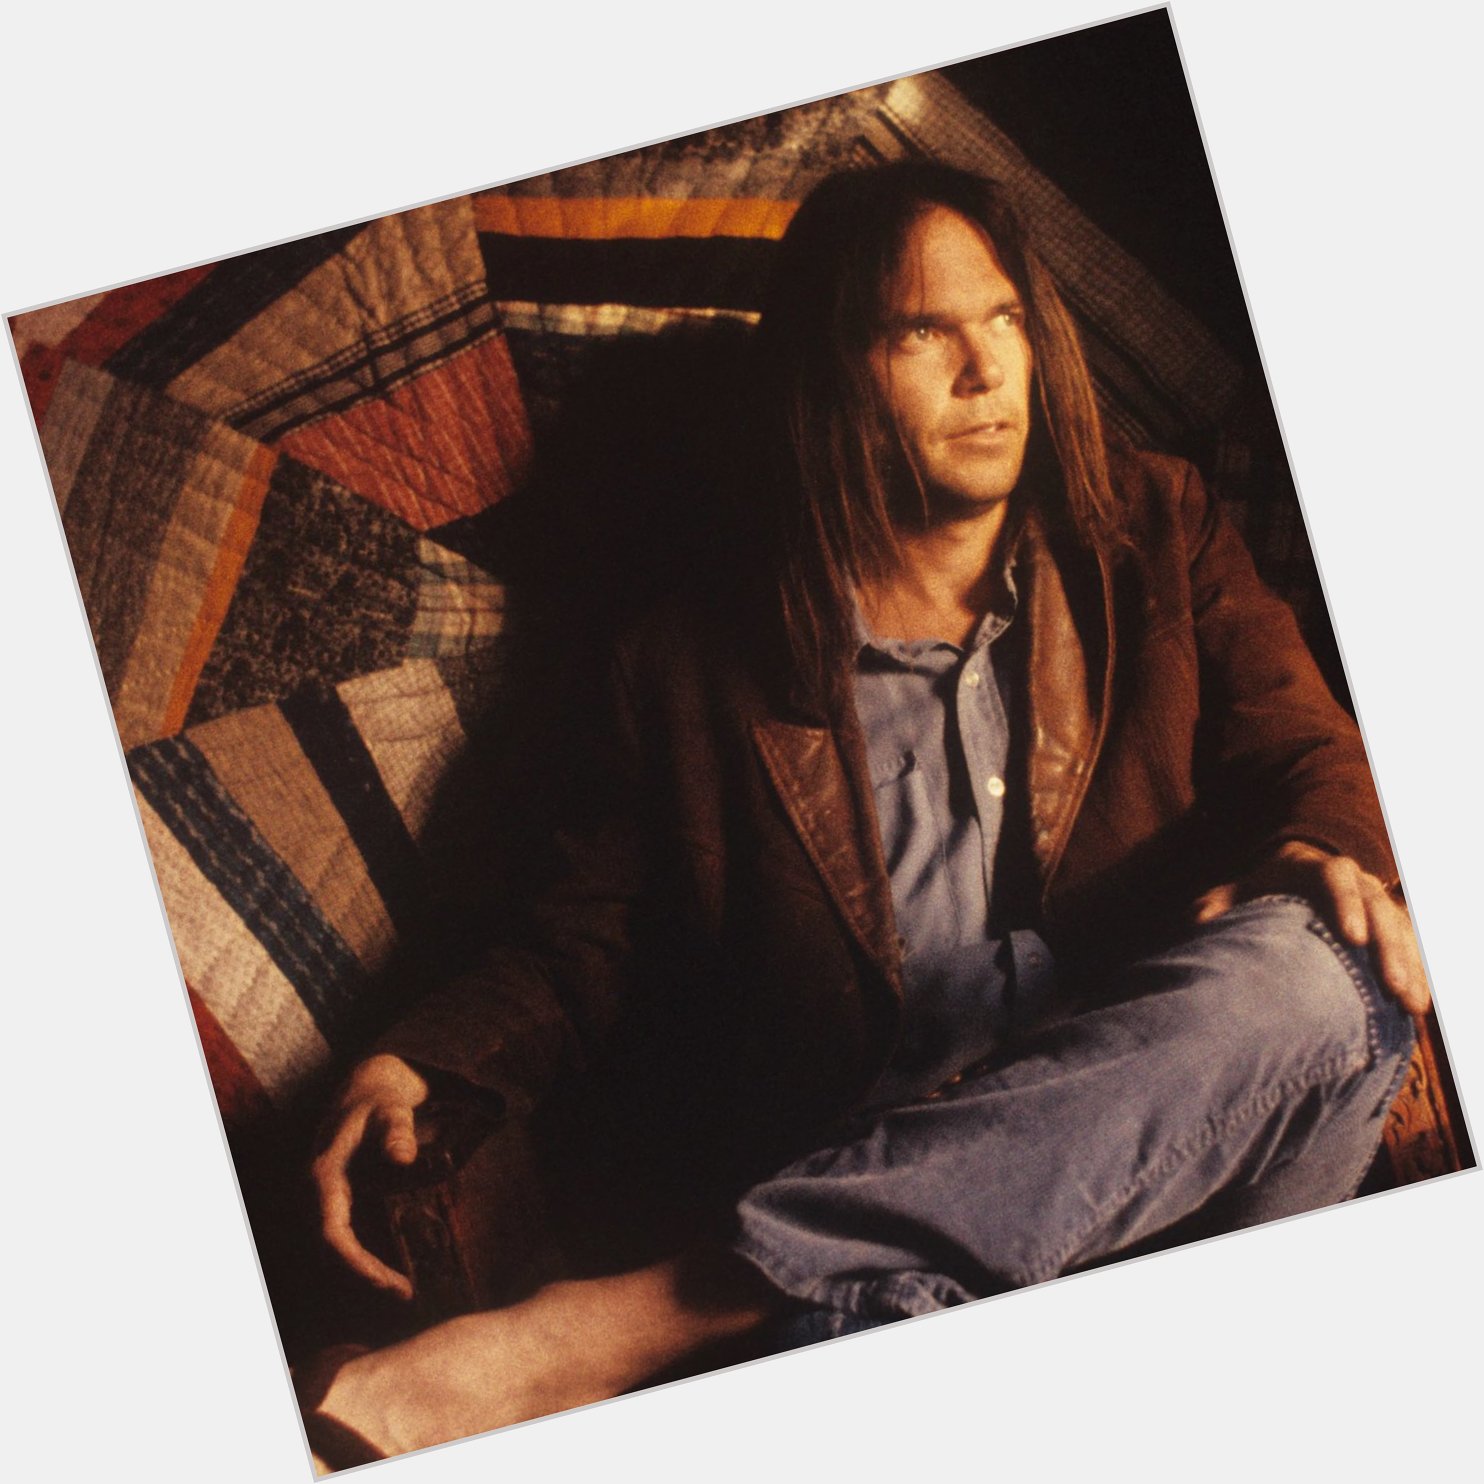 Happy birthday Neil Young, one of the most remarkable songwriters to ever live. Absolute genius. 